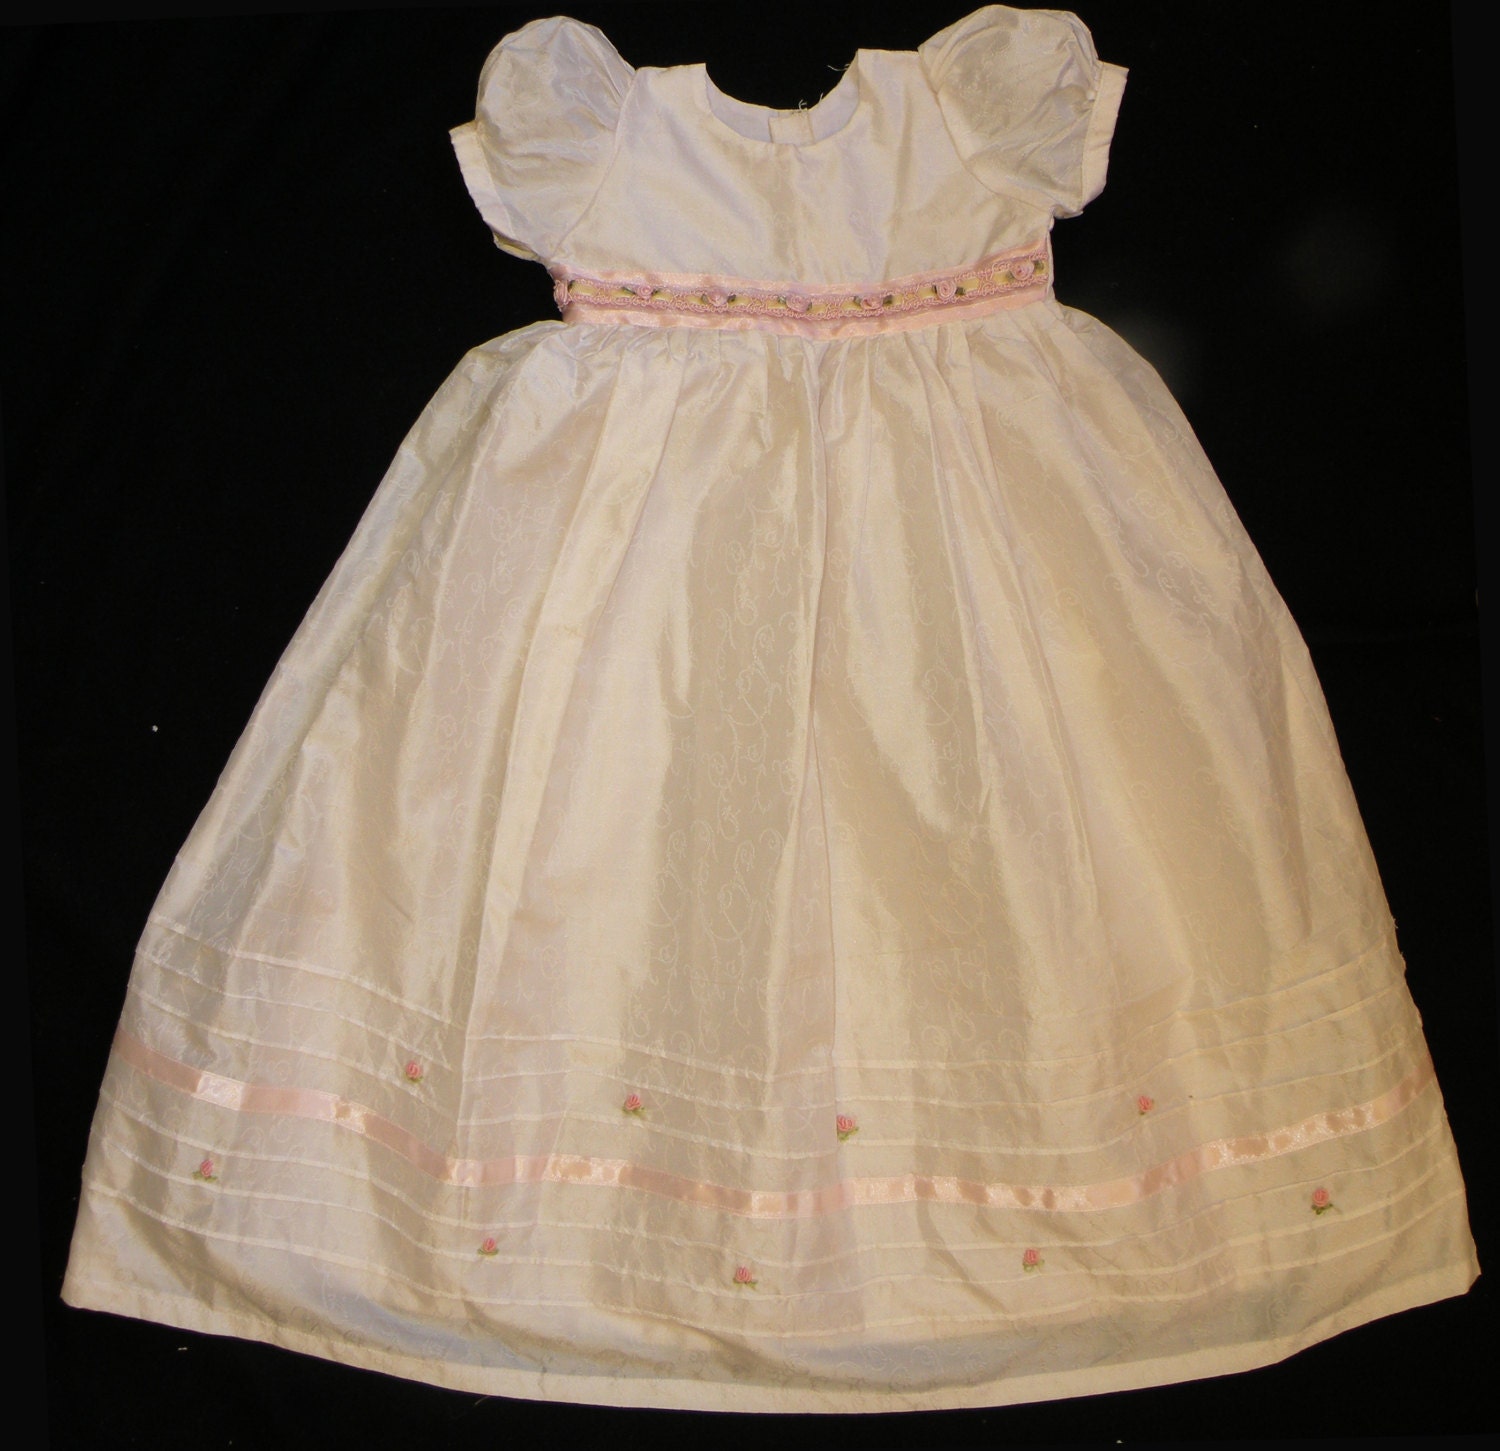 HIGH QUALITY Silk Christening, Christening Gown, Christening Dress, Blessing Gown, with Ribbon Embroidered Lace and Bonnet 6 MONTHS